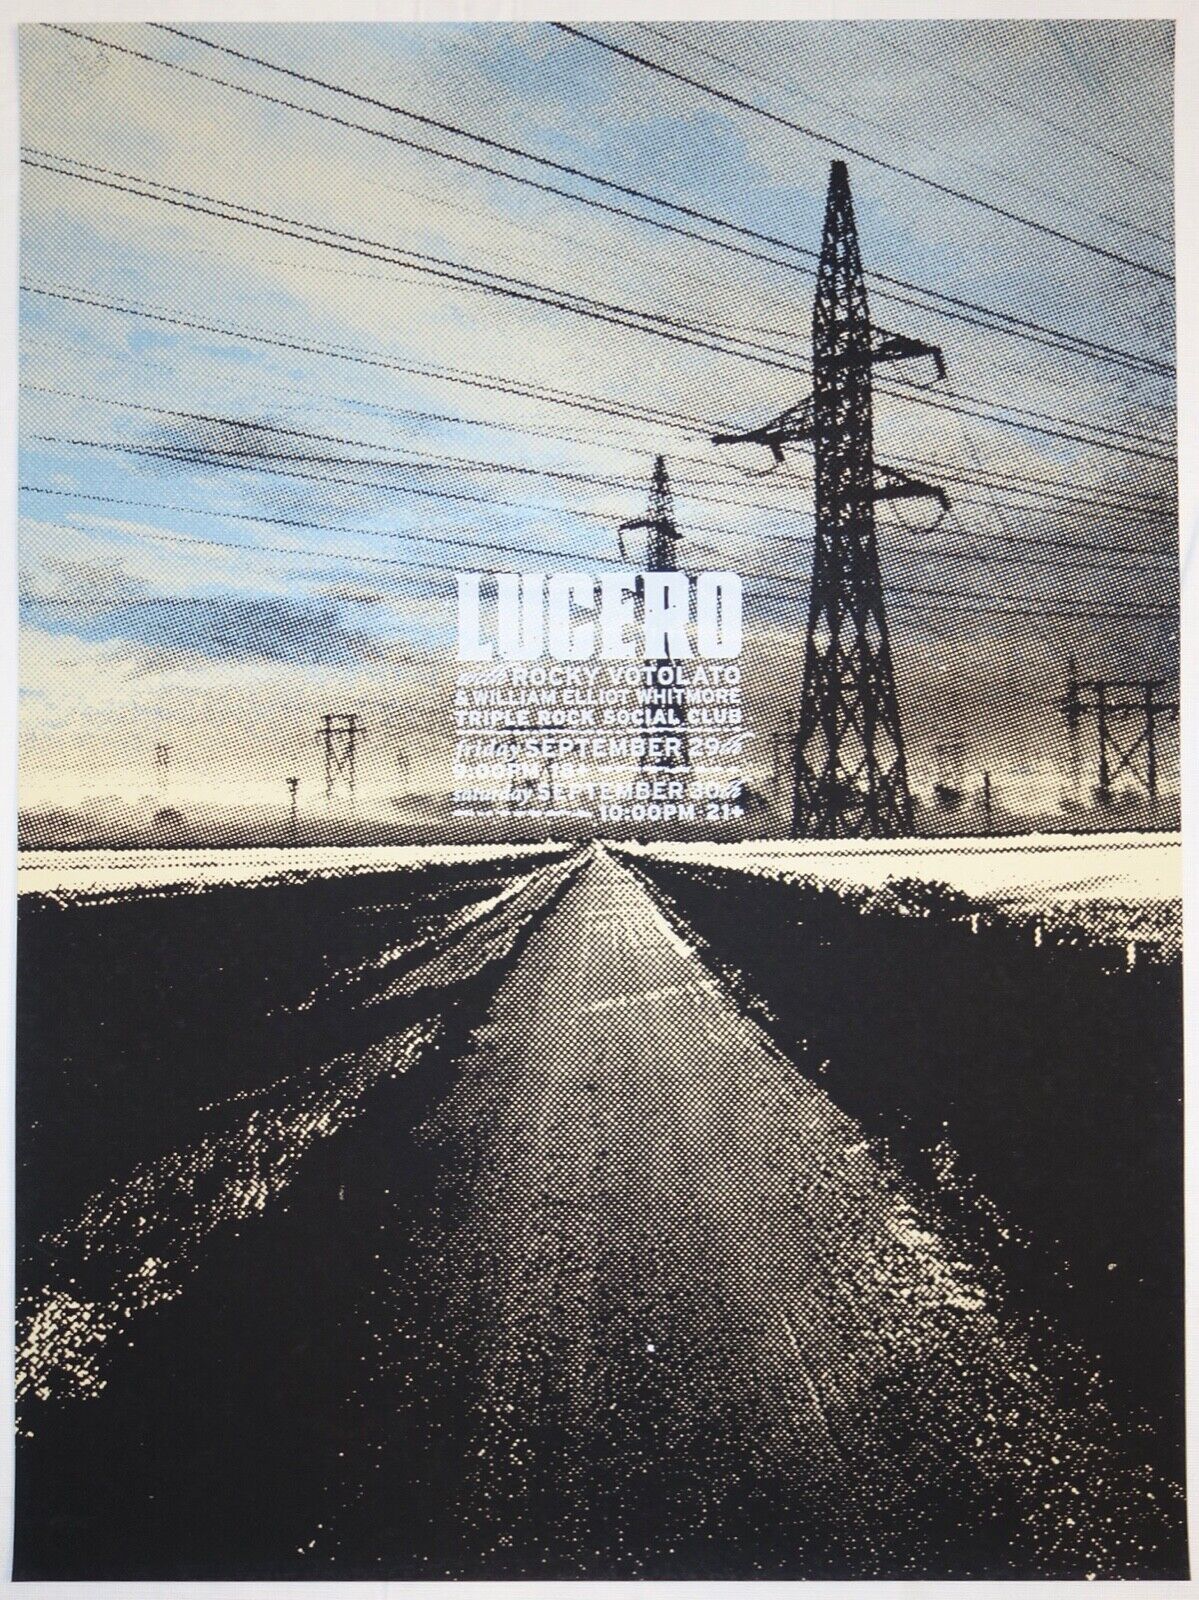 2006 Lucero - Minneapolis Blue Concert Poster S/n By Aesthetic Apparatus